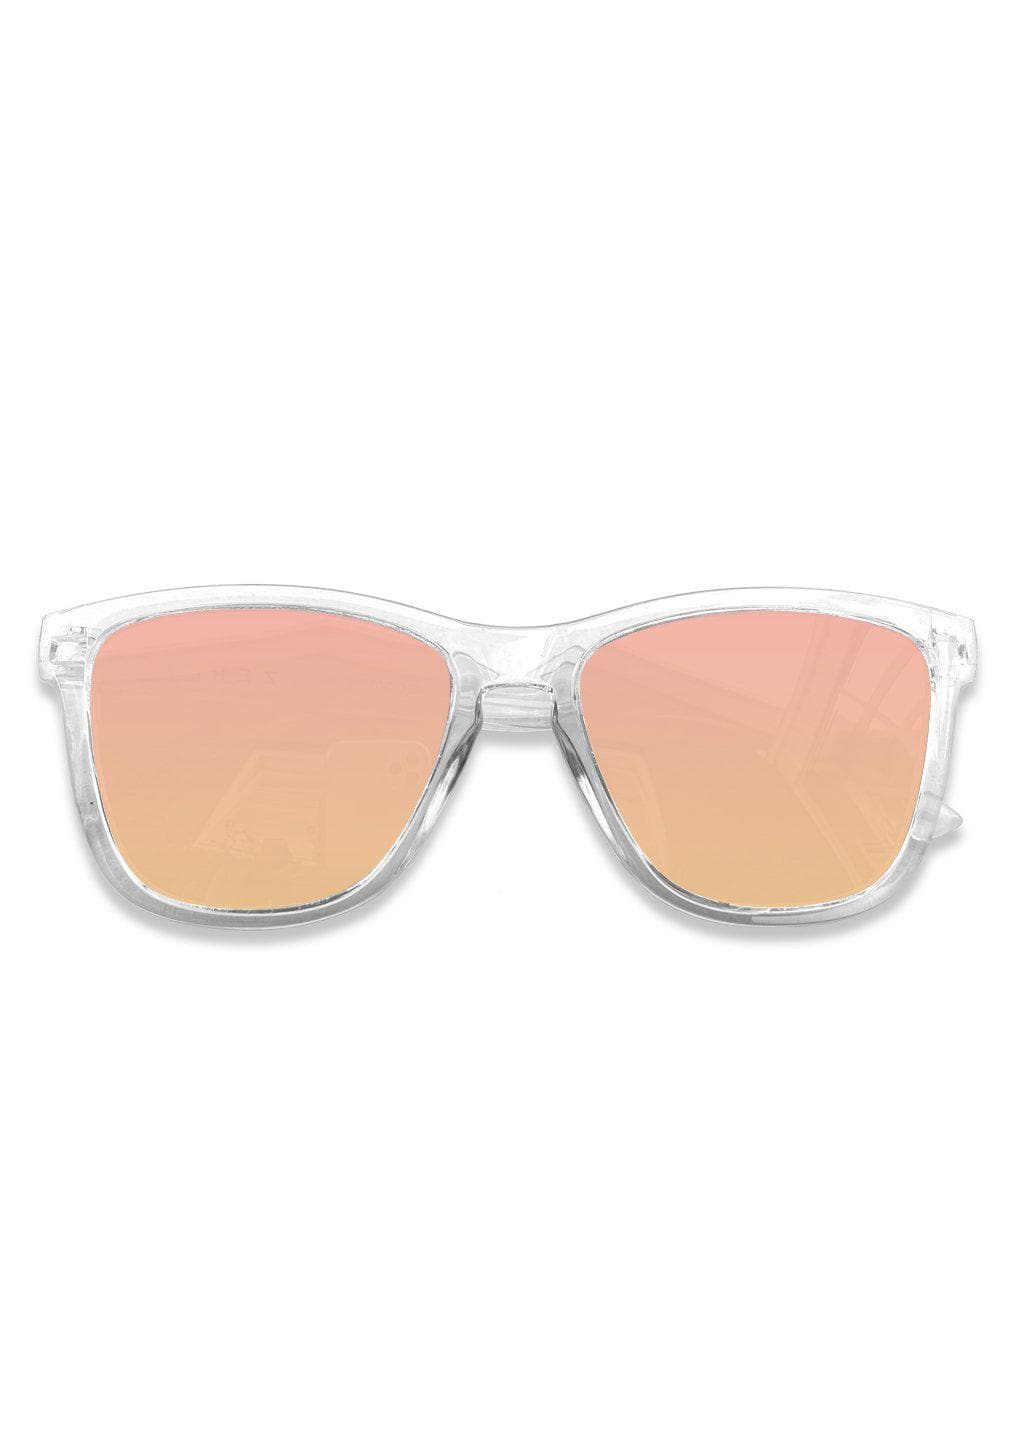 Our Mood V2 is an improved version of our last wayfarers. Plastic body for great quality and durabilty. This is Firefly with a transparent frame and rosé mirror lenses. From the front.